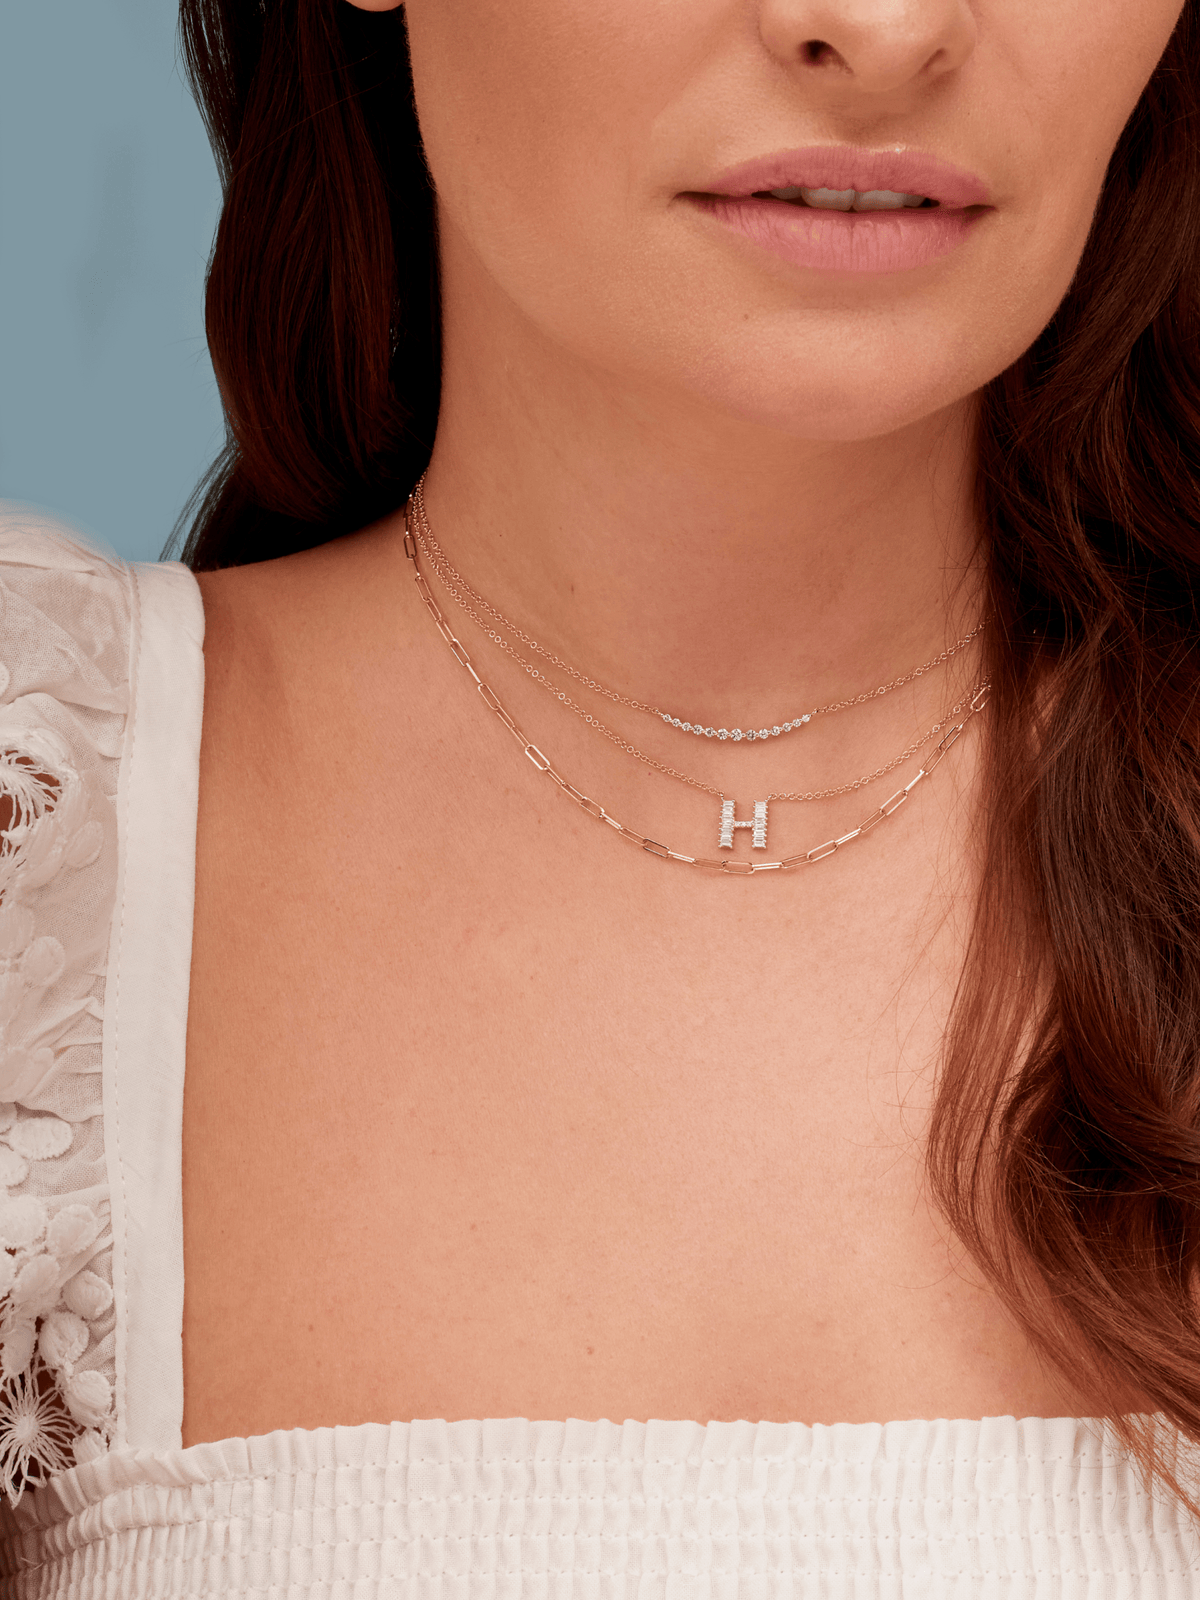 14K gold baguette diamond initial charm on dainty gold chain layered with dimaond chasing gold necklace and thin gold paperclip necklace